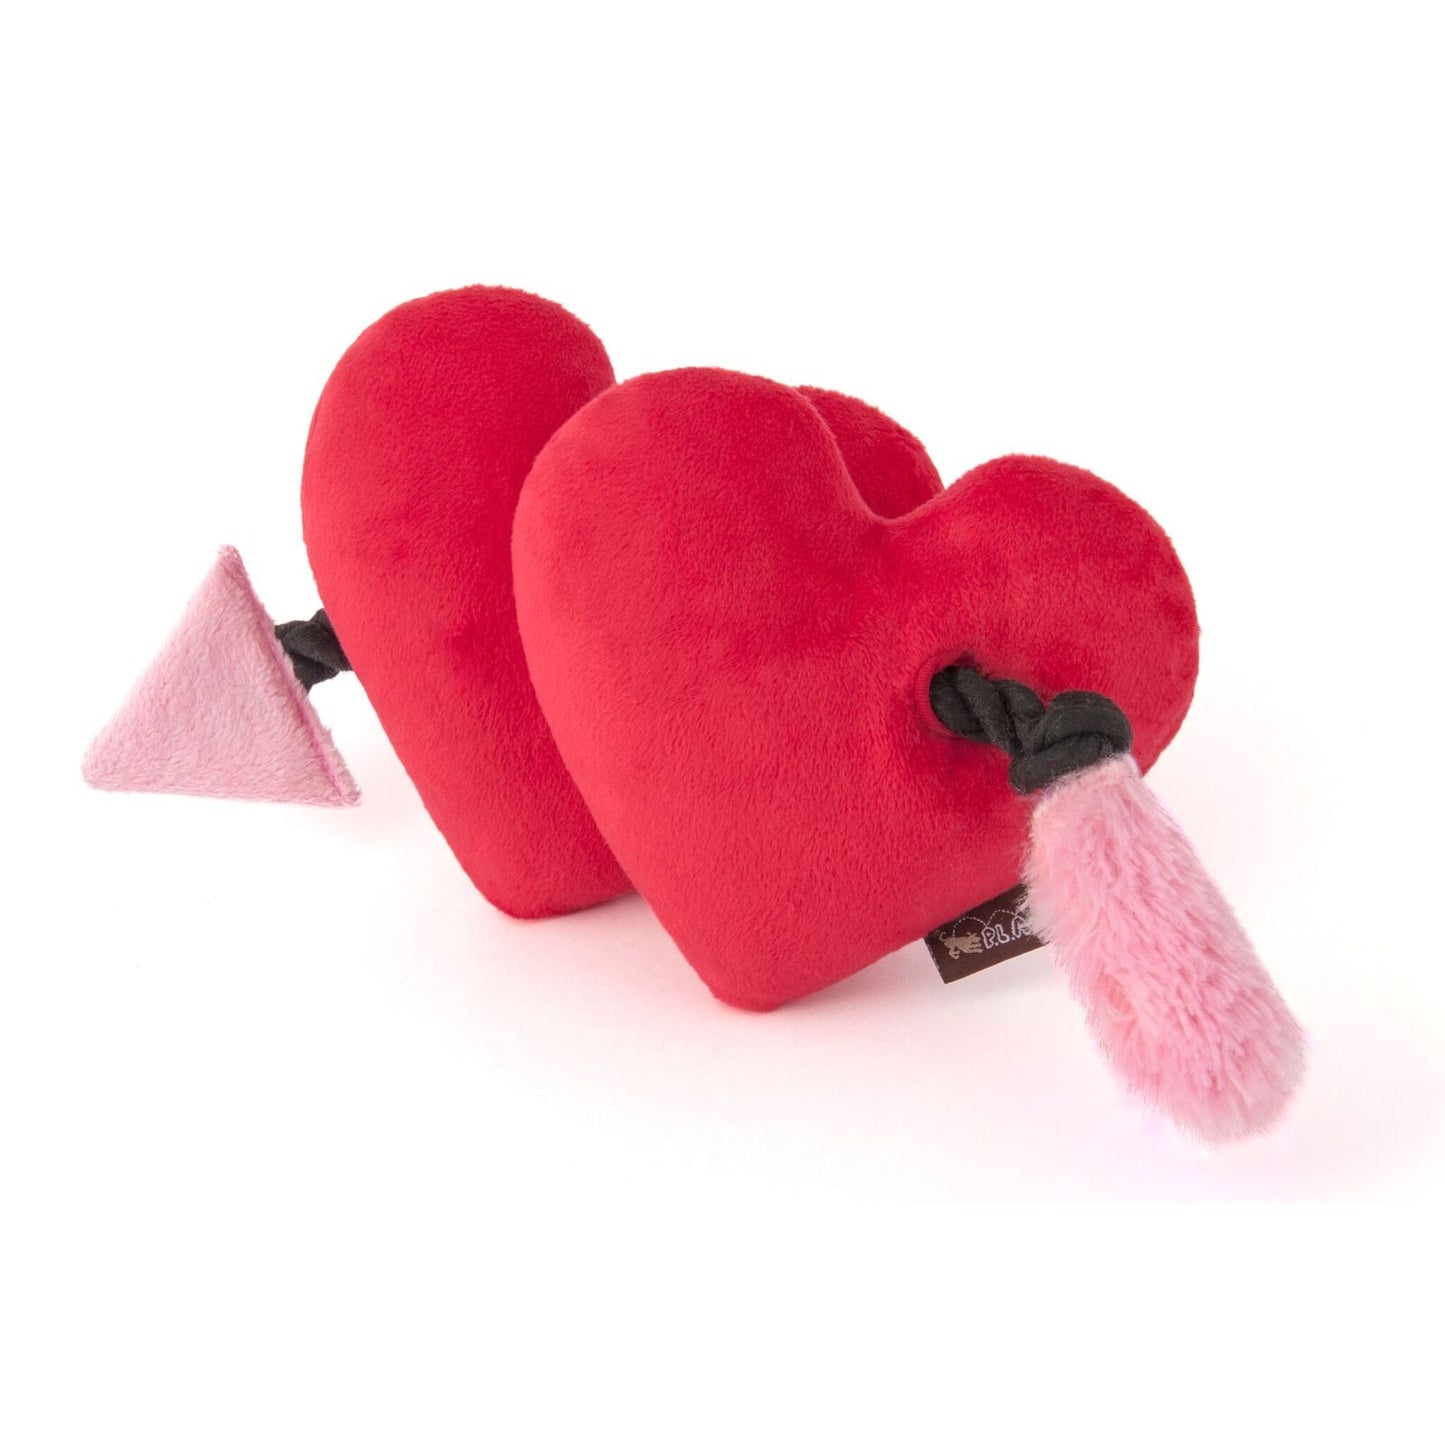 Fur-Ever Hearts Dog Toy - Crew LaLa